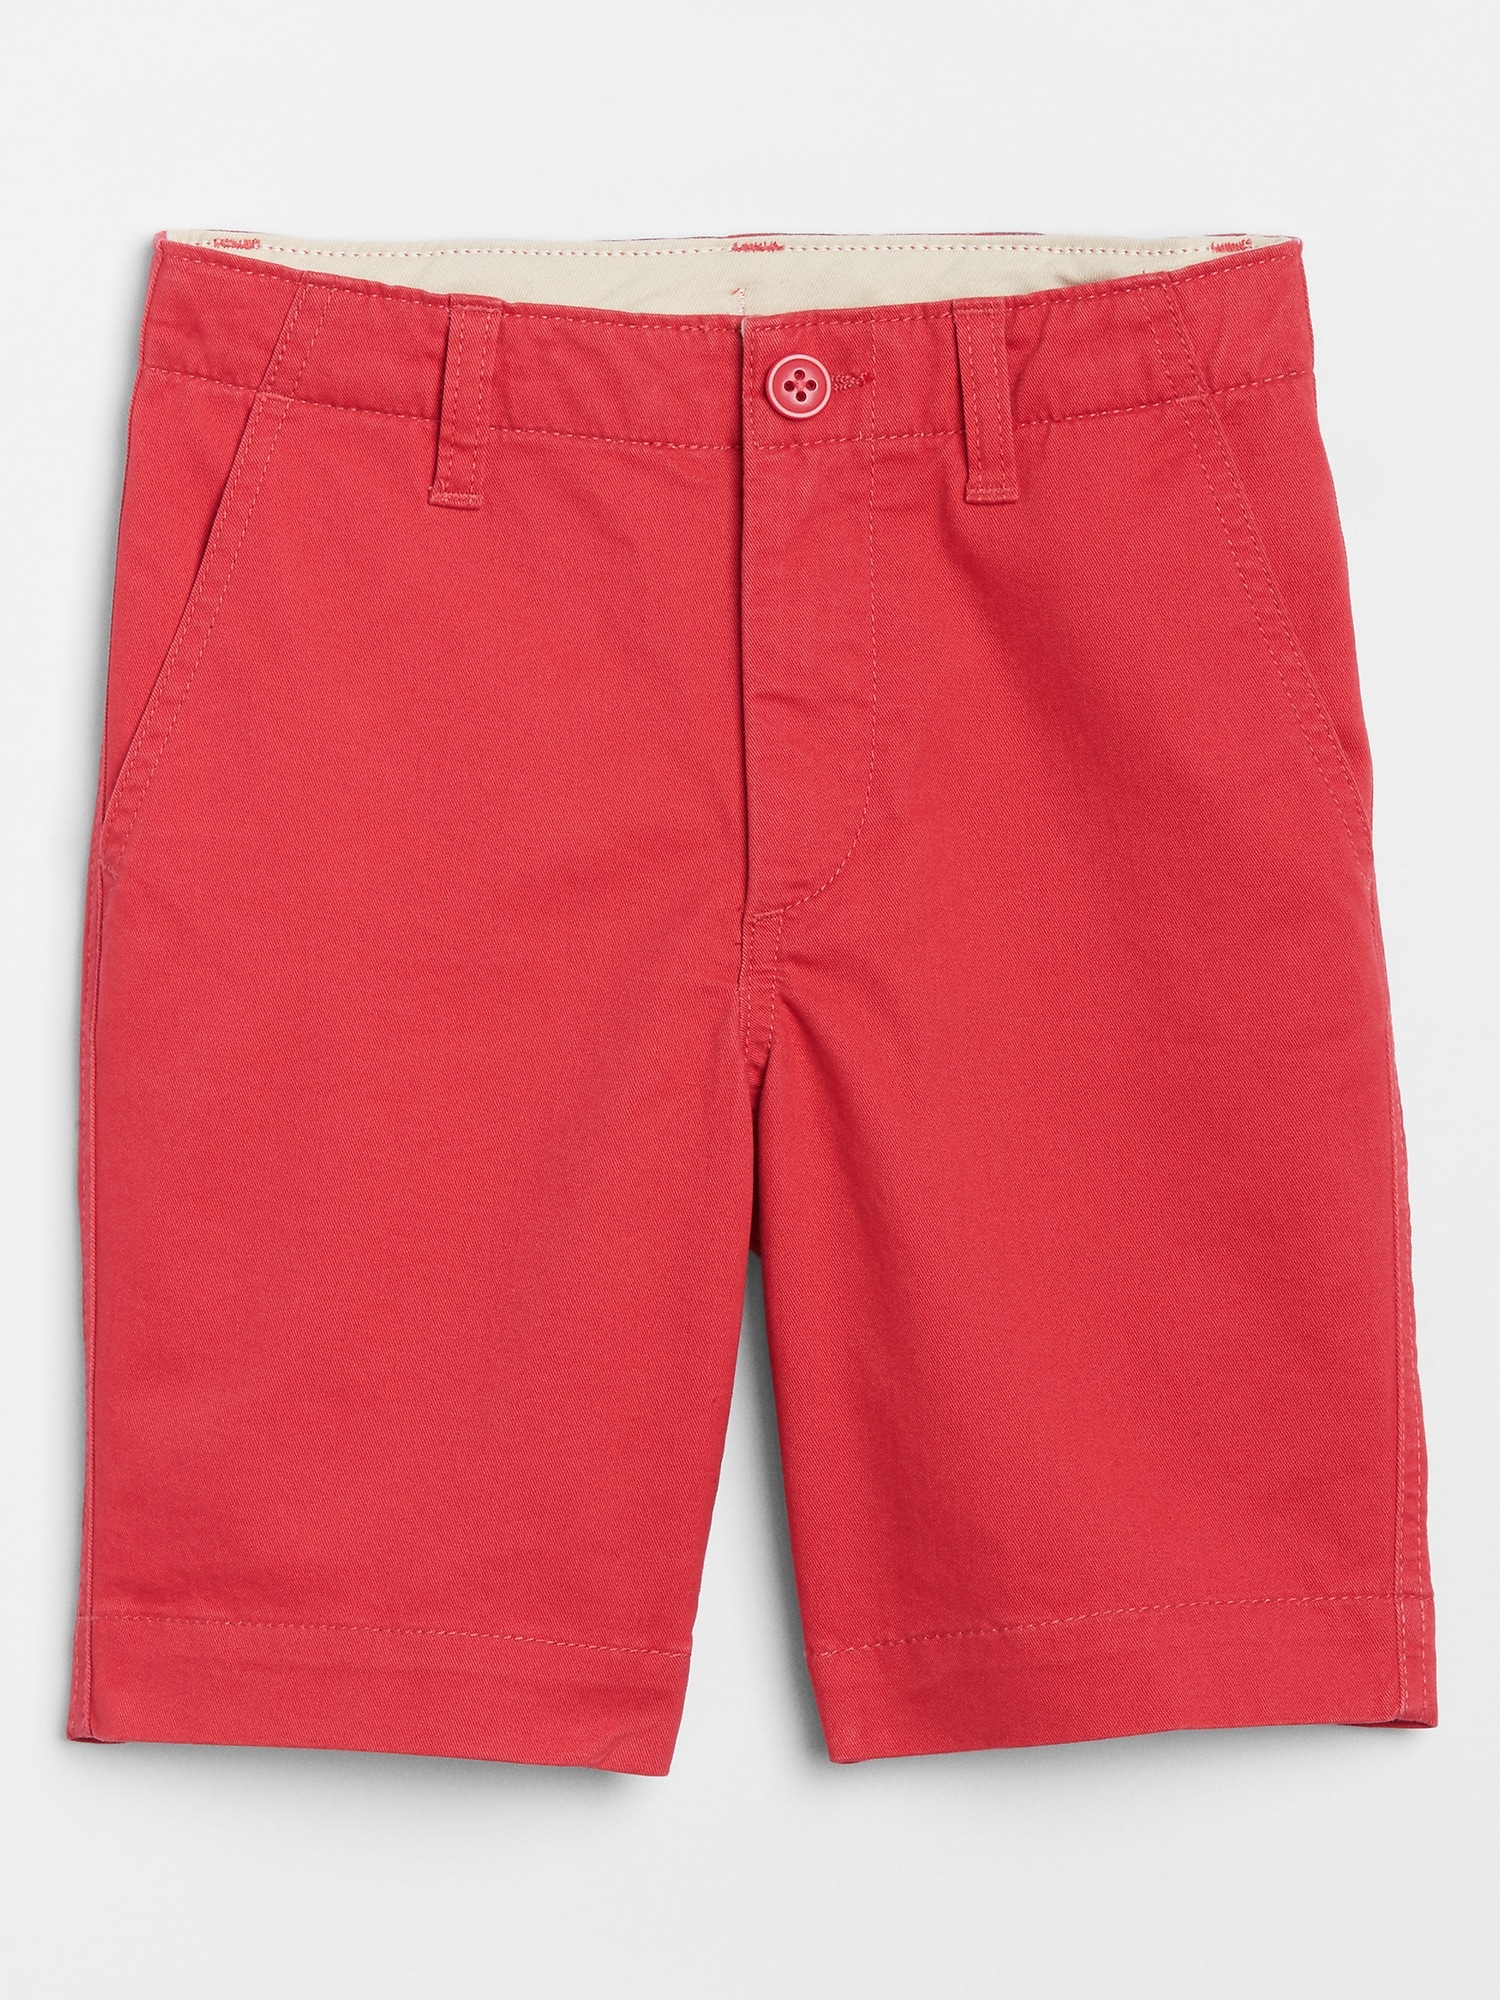 Kids Twill Shorts with Stretch | Gap Factory